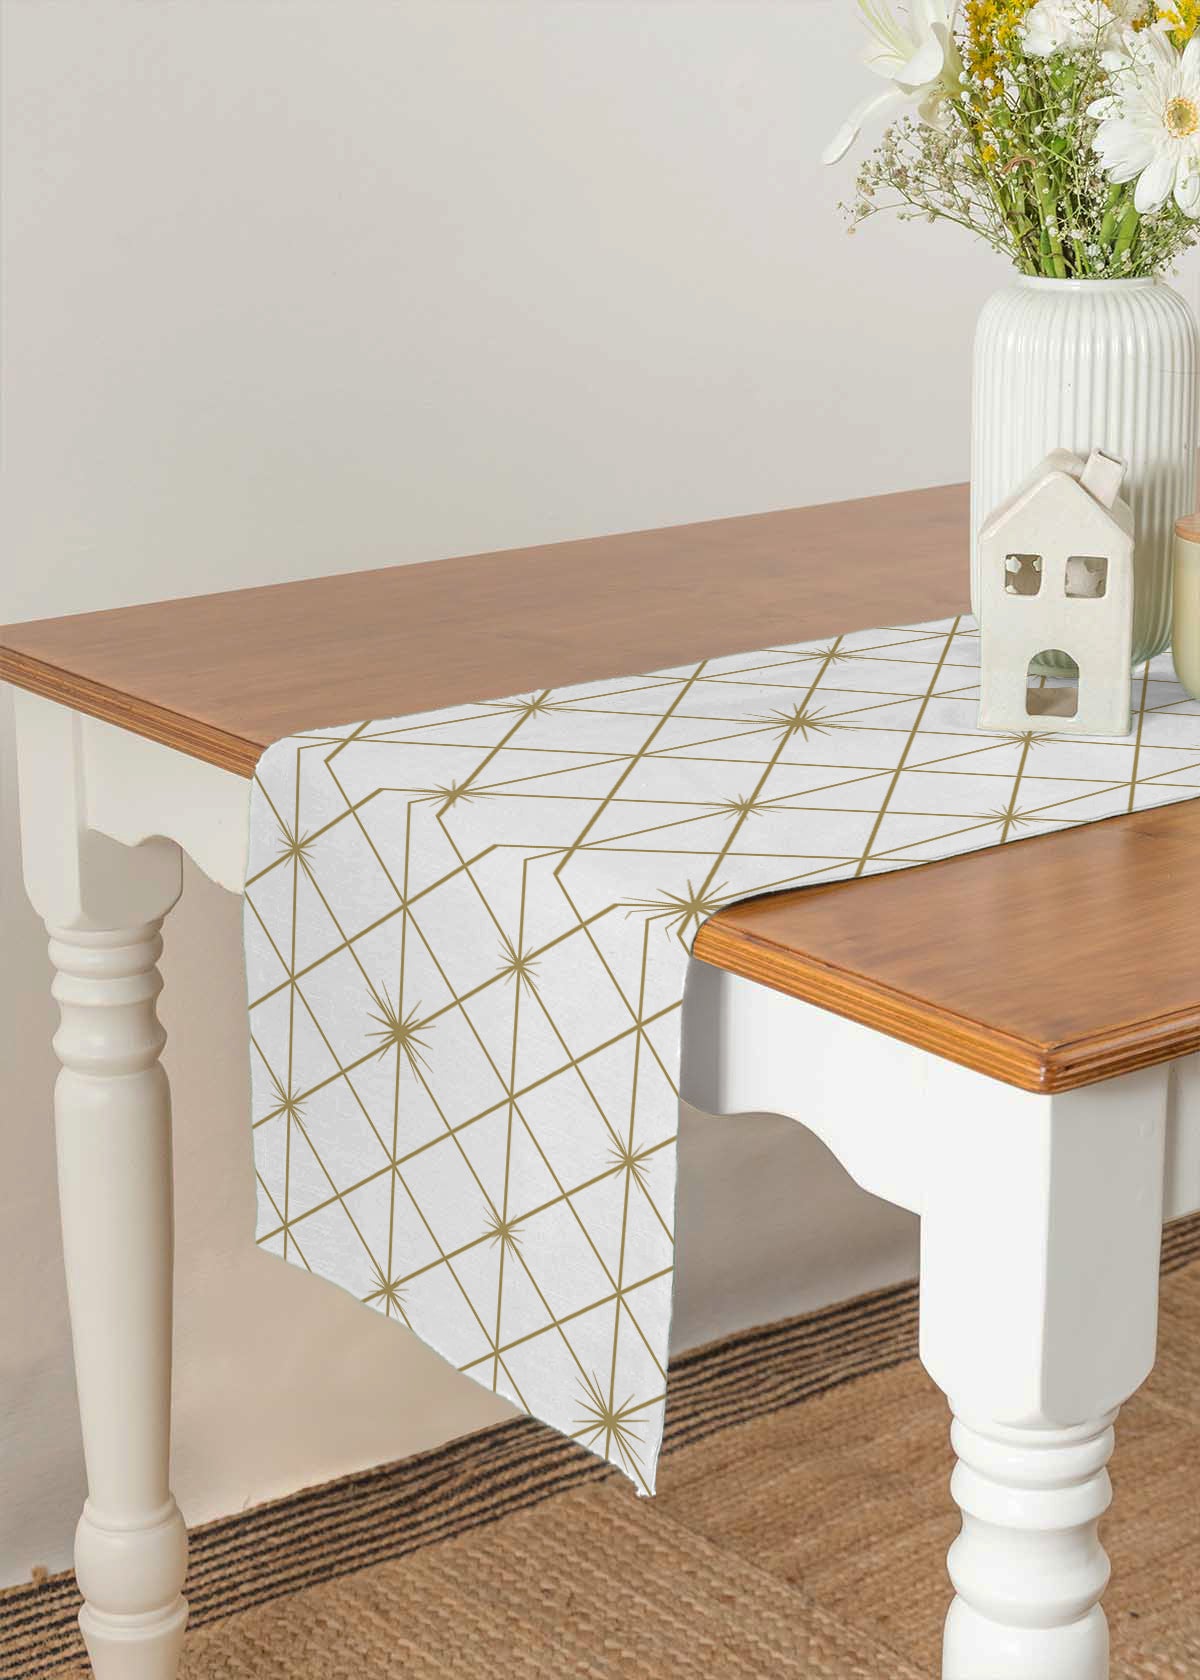 Stardust 100% cotton customisable floral table Runner for dining - Pale white & Gold